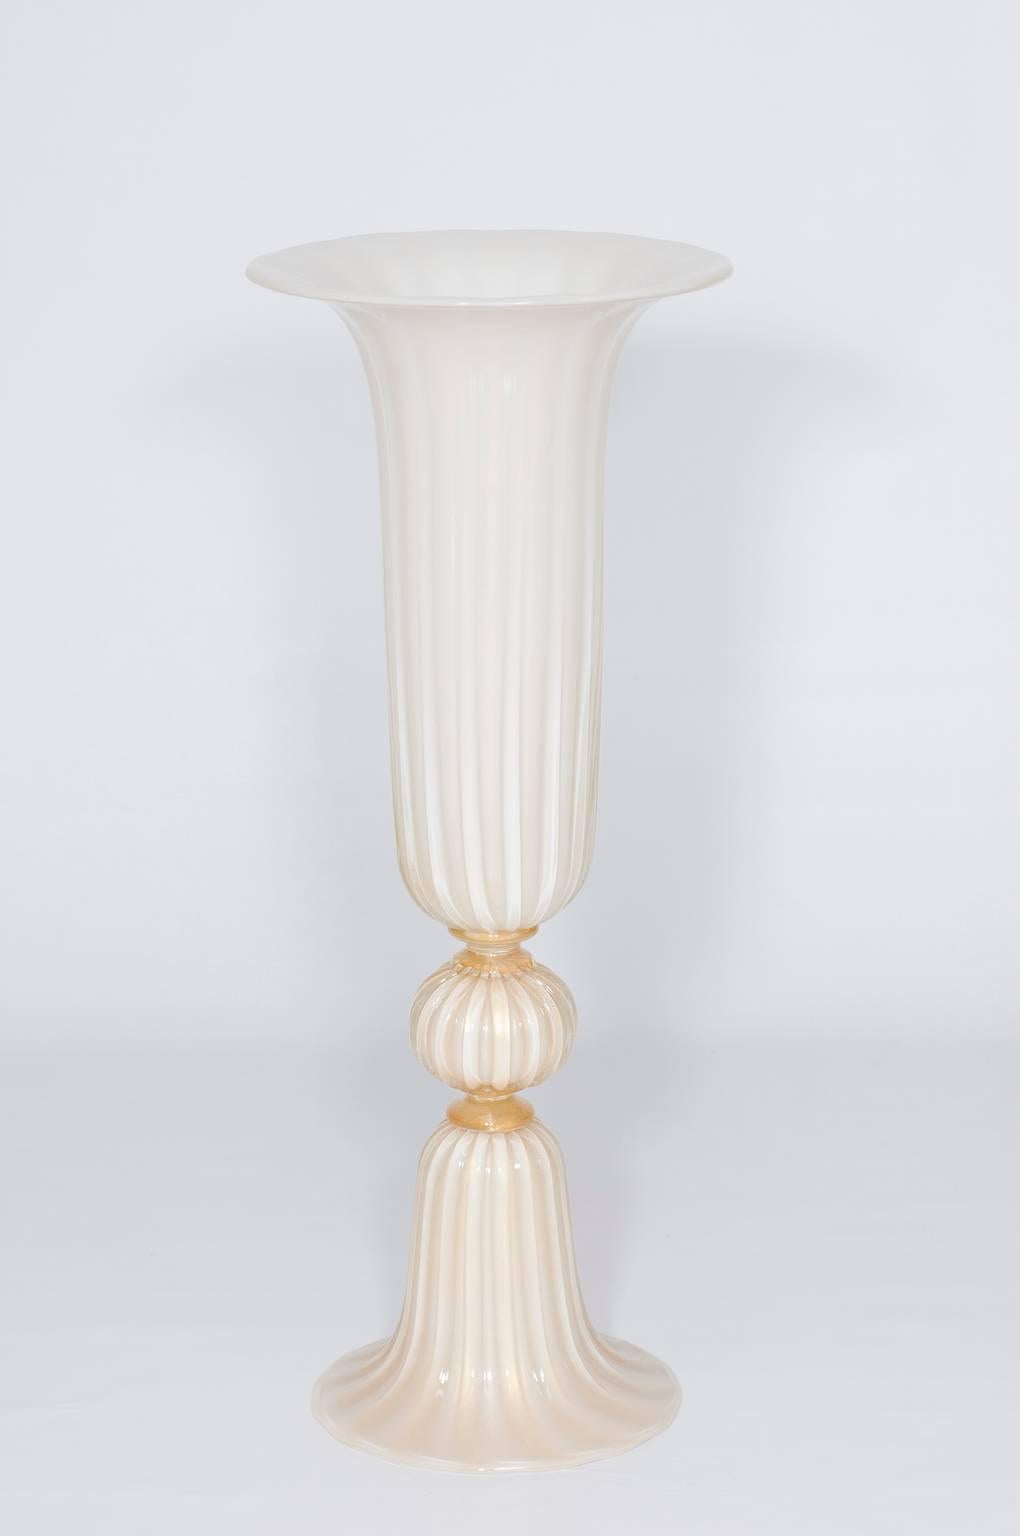 Astonished Italian Venetian, Column Vase, blown Murano Glass, White & Gold, Barovier, 1980s.
The amazing elegant and astonishing vase is composed by a huge white bowl, supported in a white column, with in the middle a magnificent blown Murano glass